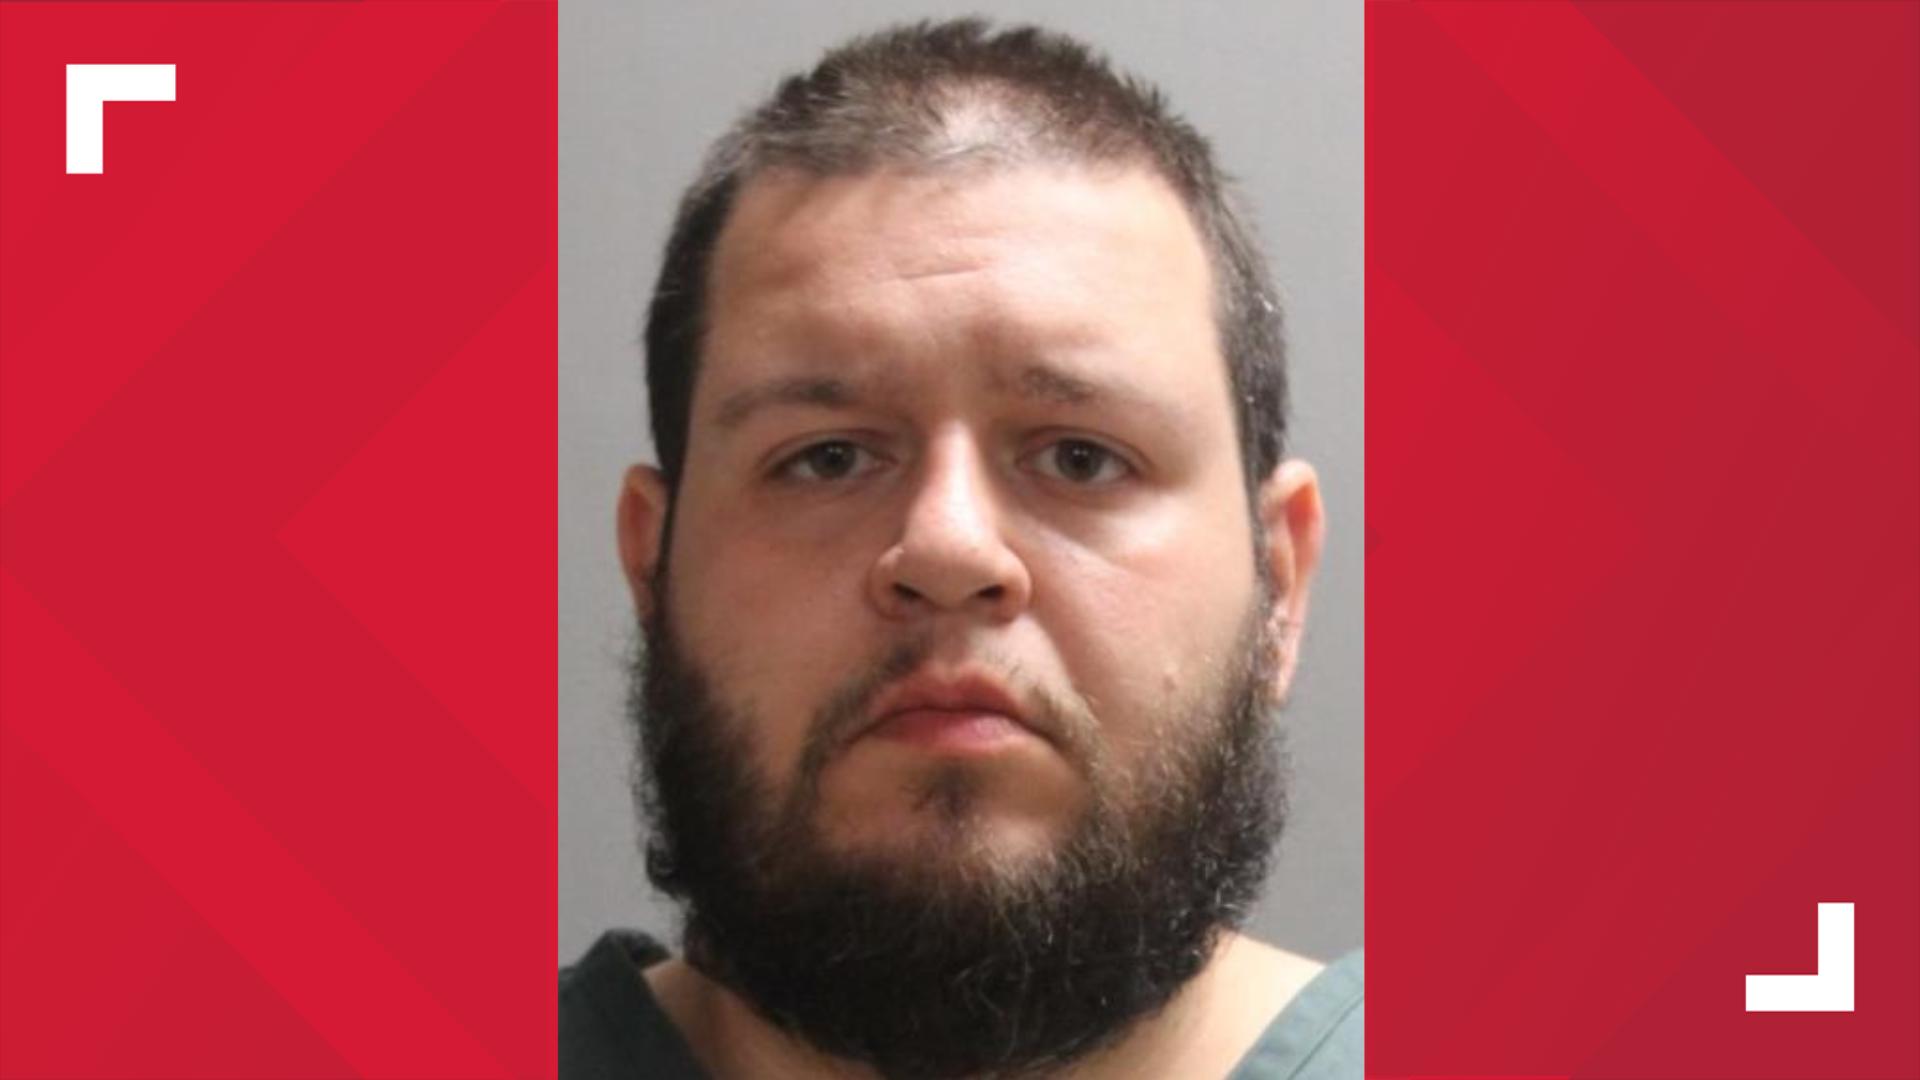 Chad Sadlowski, 33, received four charges after trying to meet the 8-year-old child he believed he was chatting with, police said.